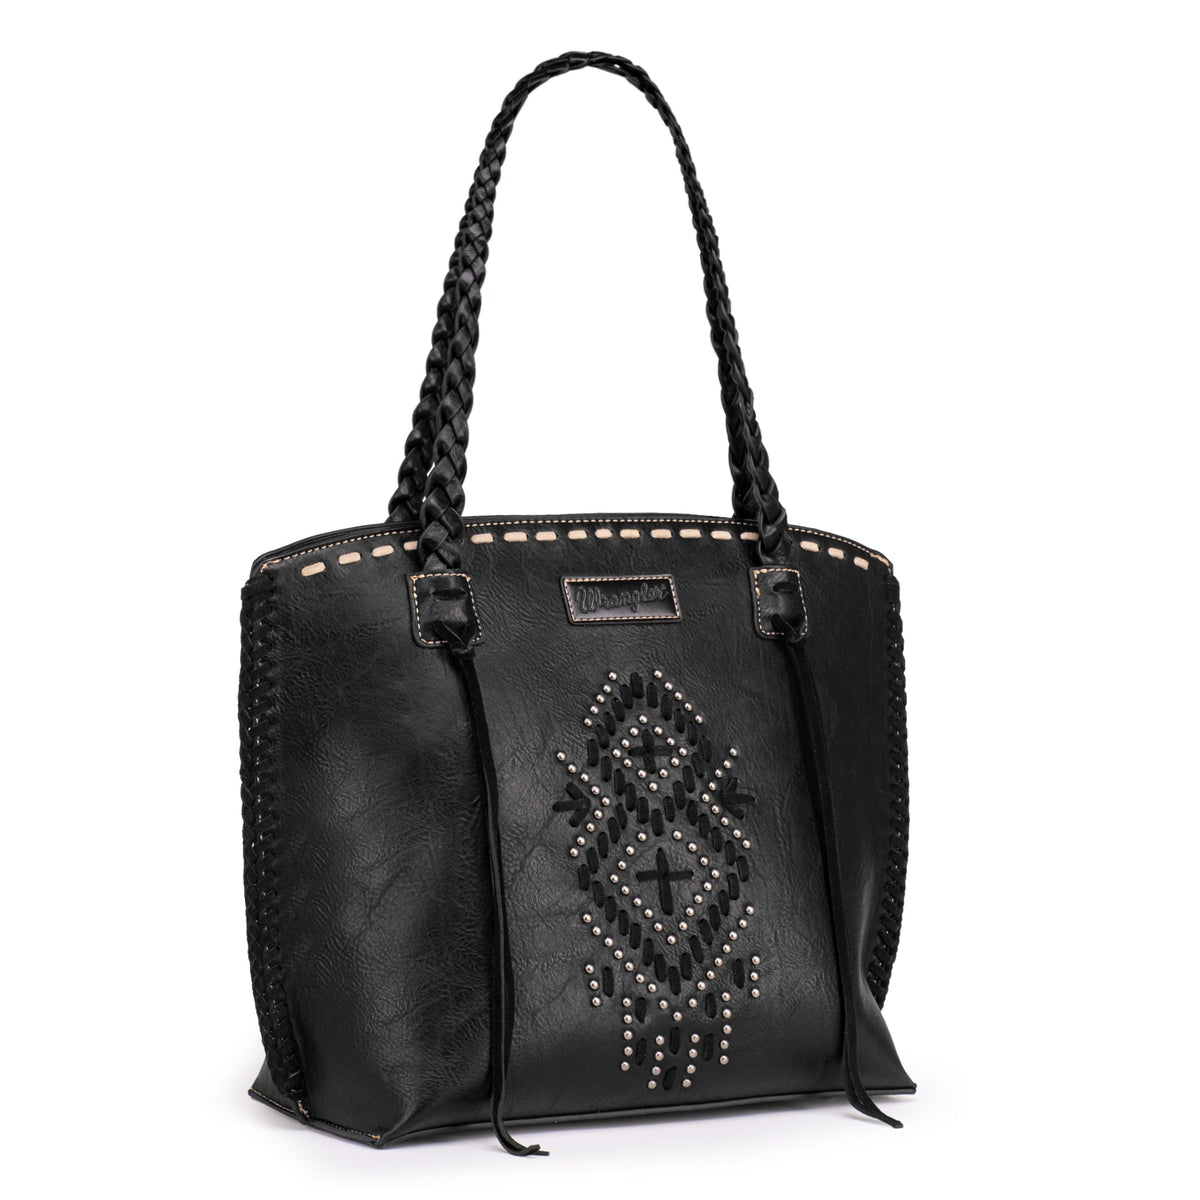 Wrangler Tribal Whipstitch Braided Strap Tote - Cowgirl Wear